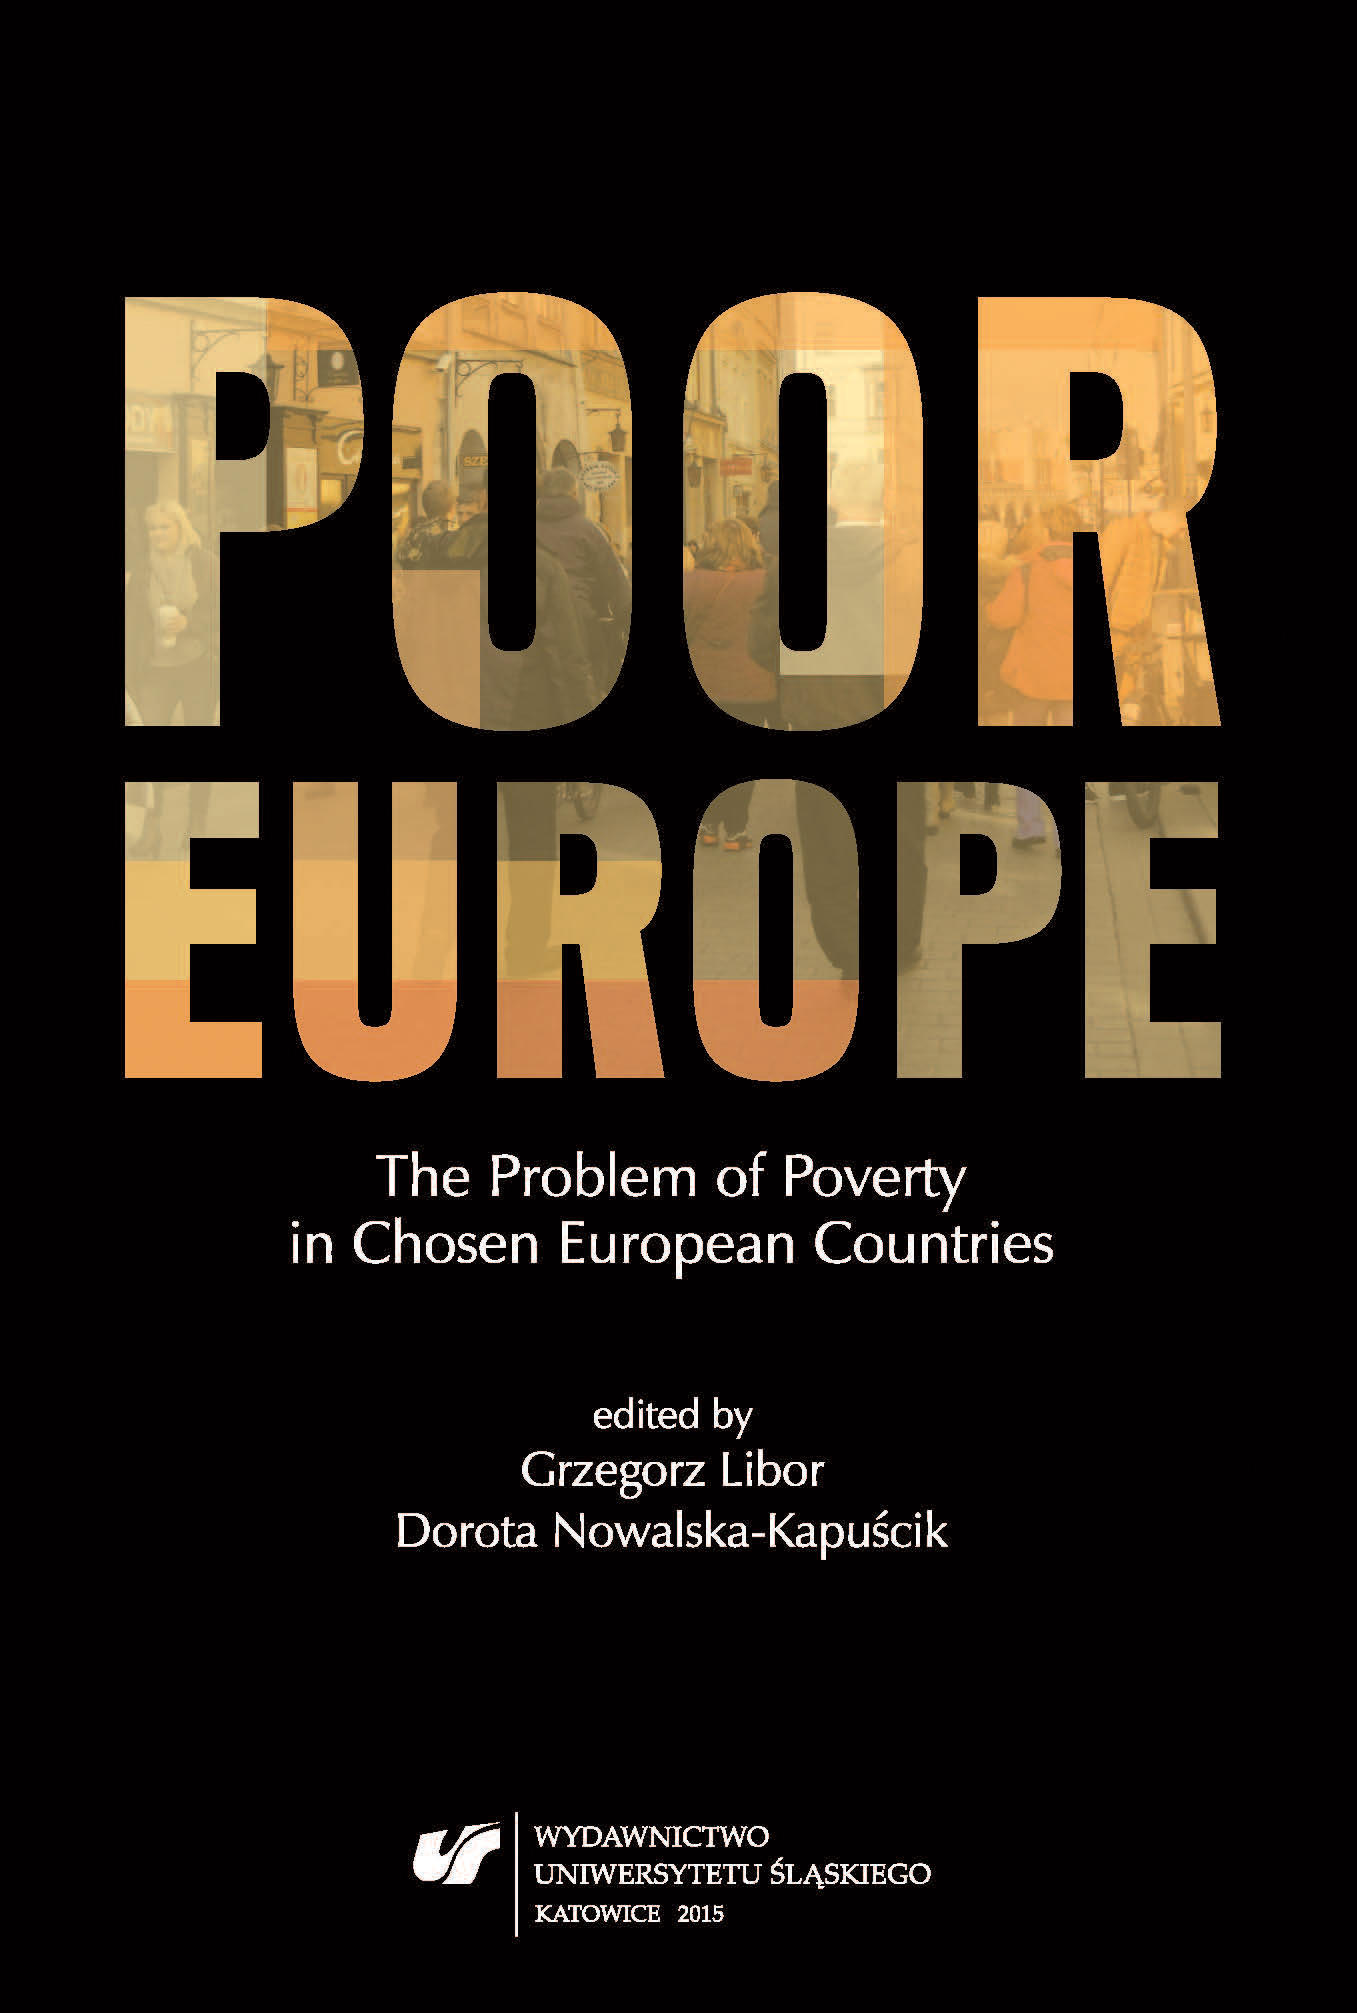  Poor Europe. The Problem of Poverty in Chosen European Countries